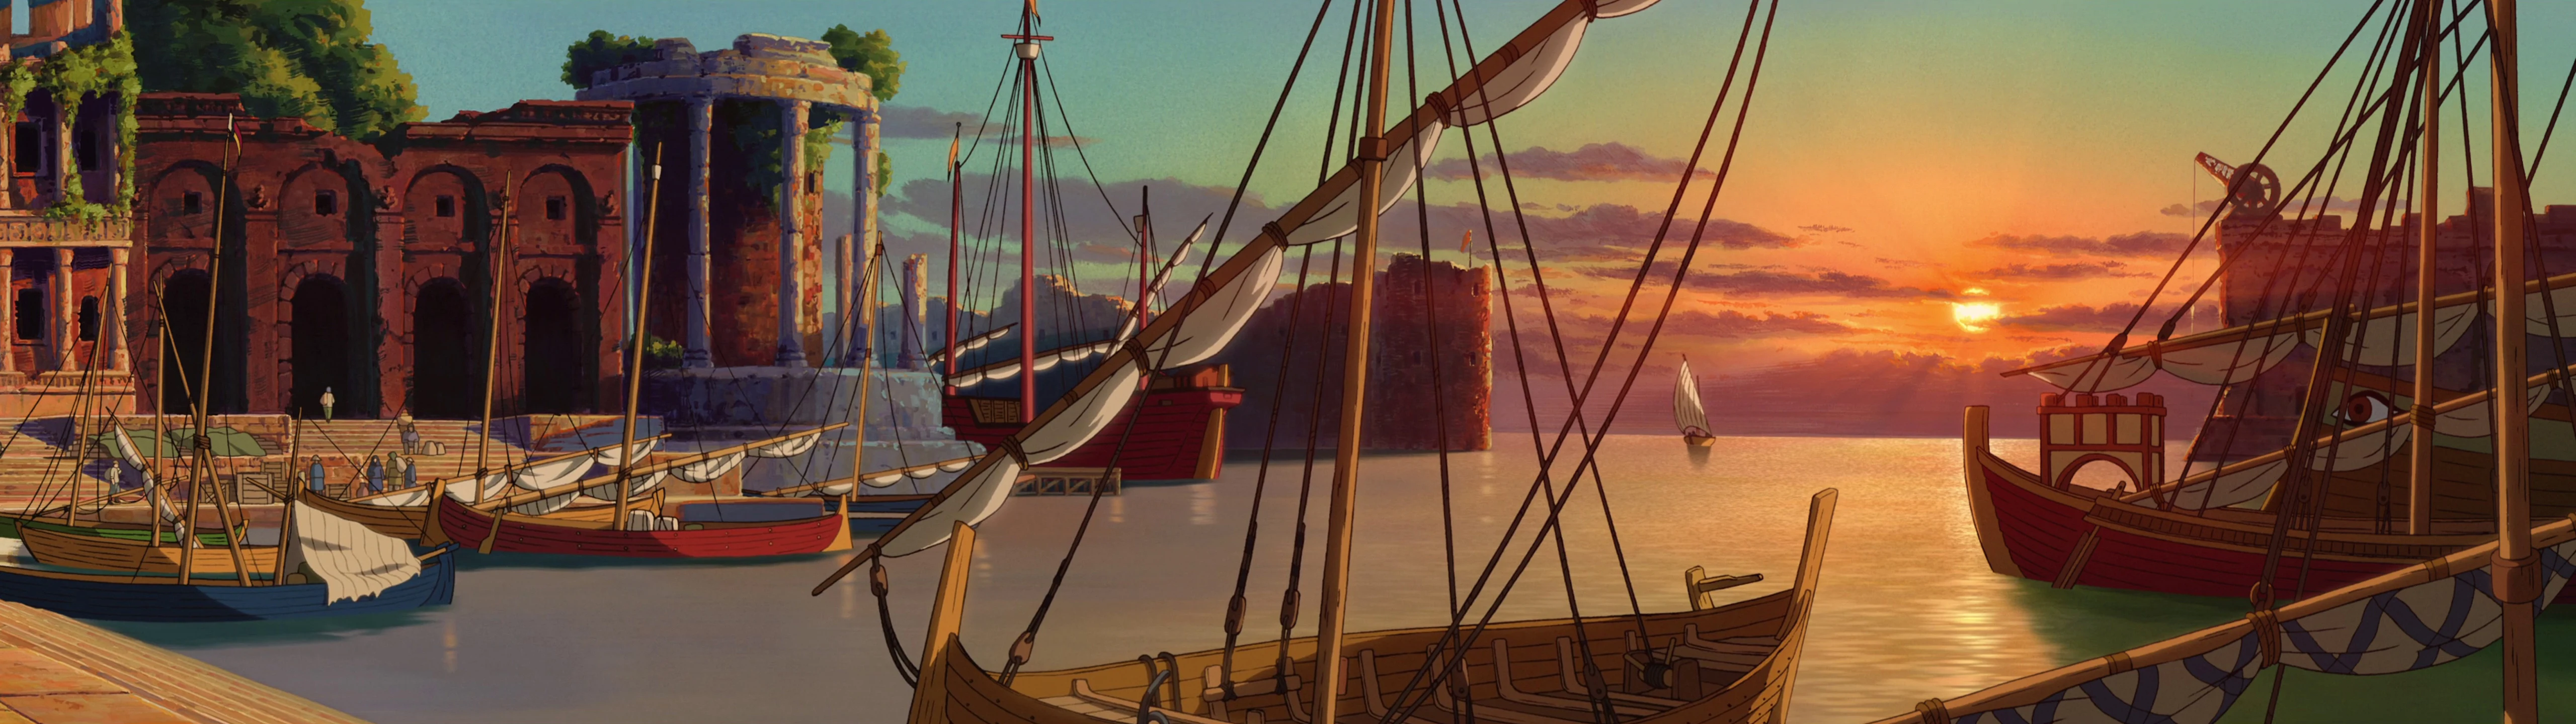 Awesome Tales From Earthsea Wallpaper 4K